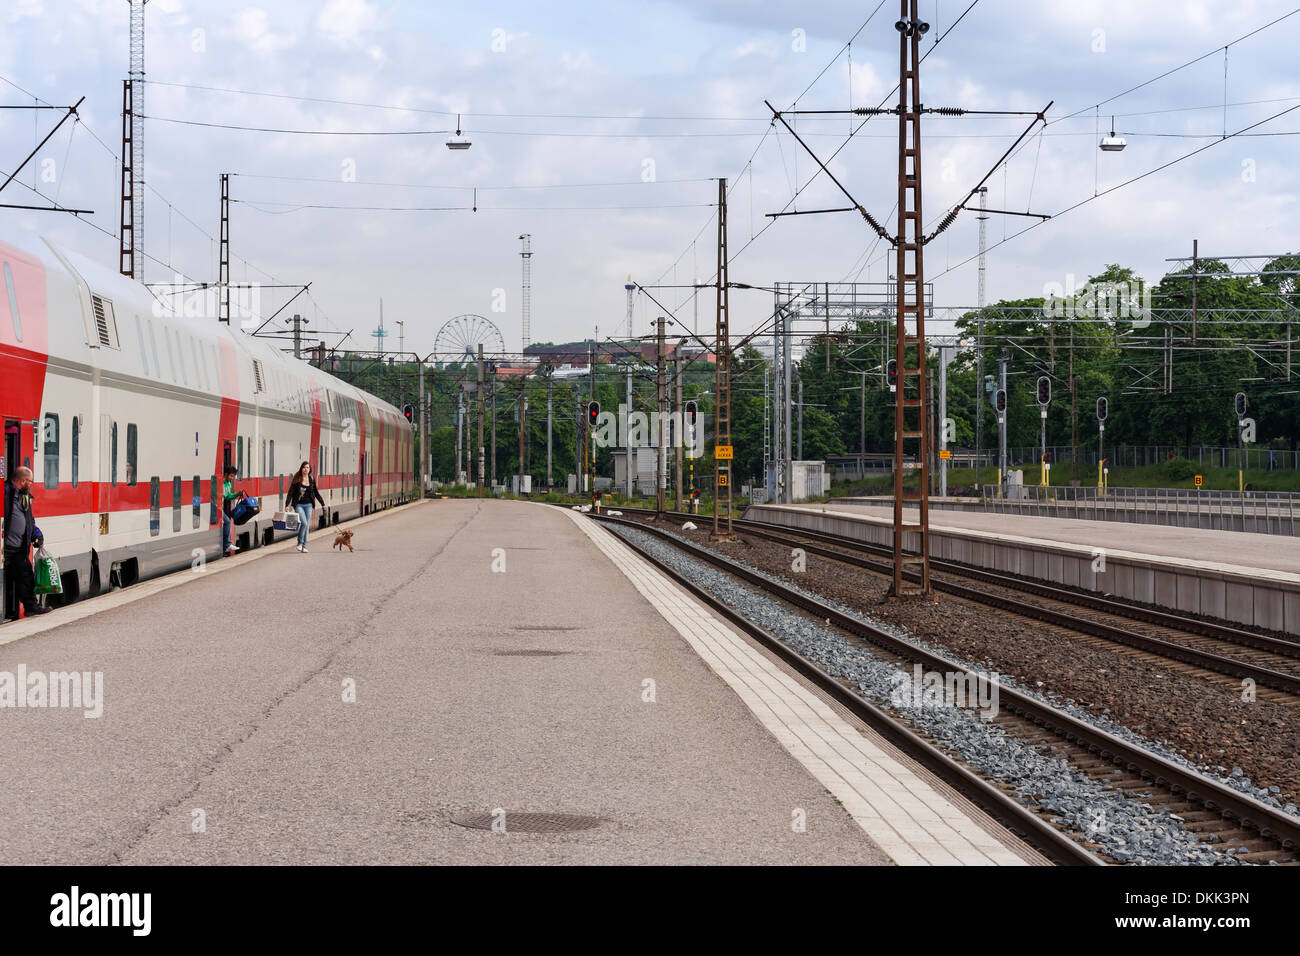 Passengers getting off a Pendolino train at Helsinki railway station on a summer day. Stock Photo